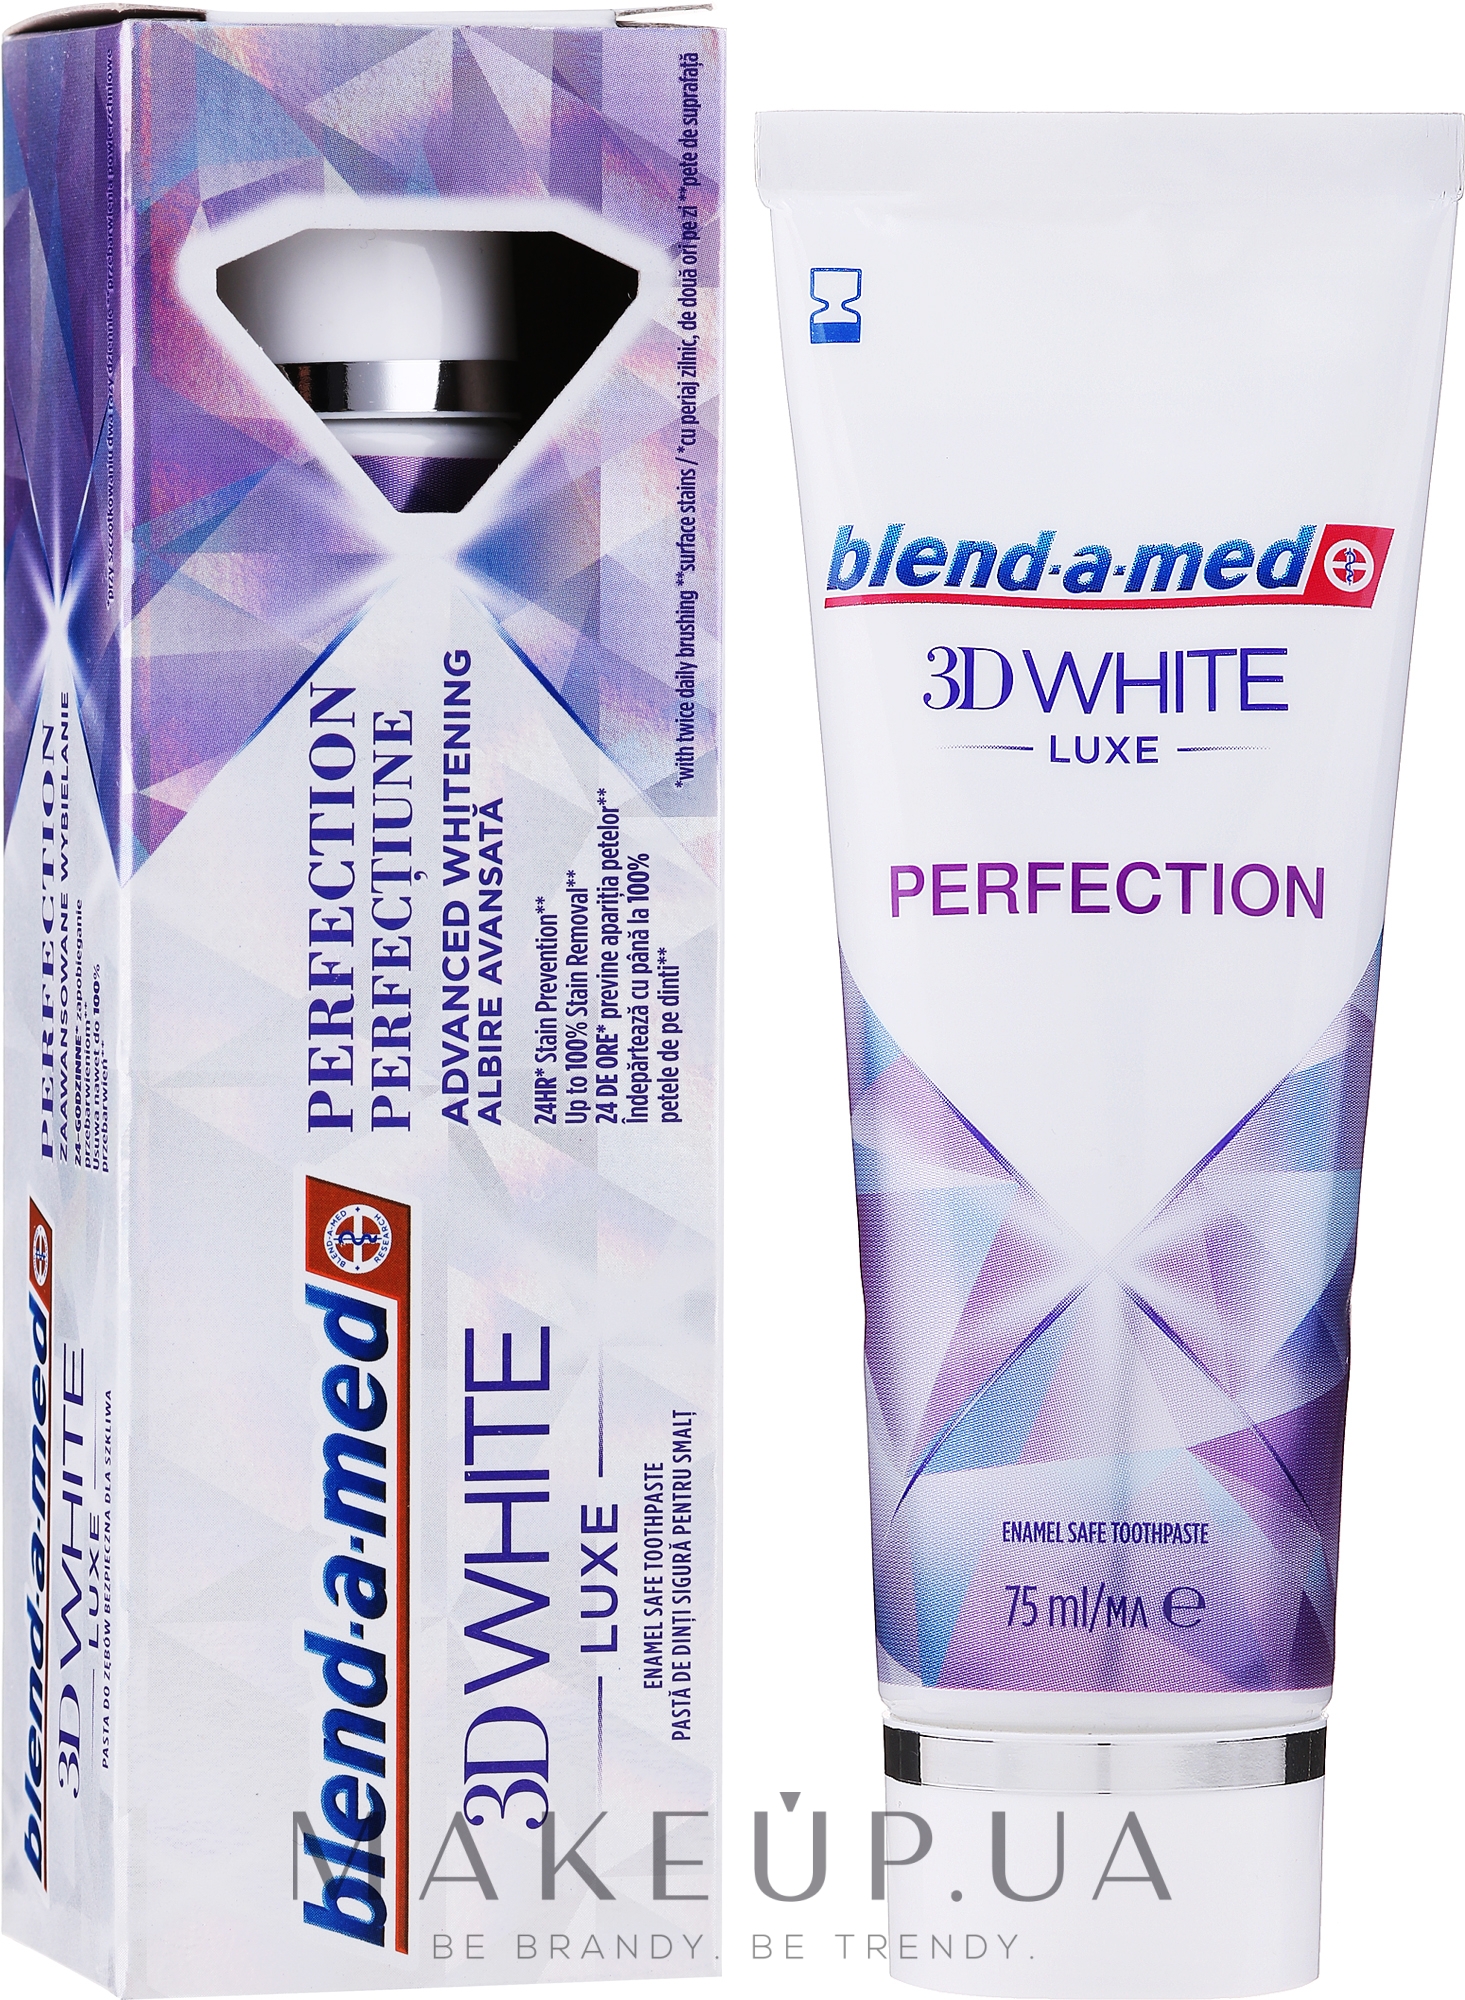 Зубная паста "Совершенство" - Blend-a-med 3D White Luxe Perfection — фото 75ml